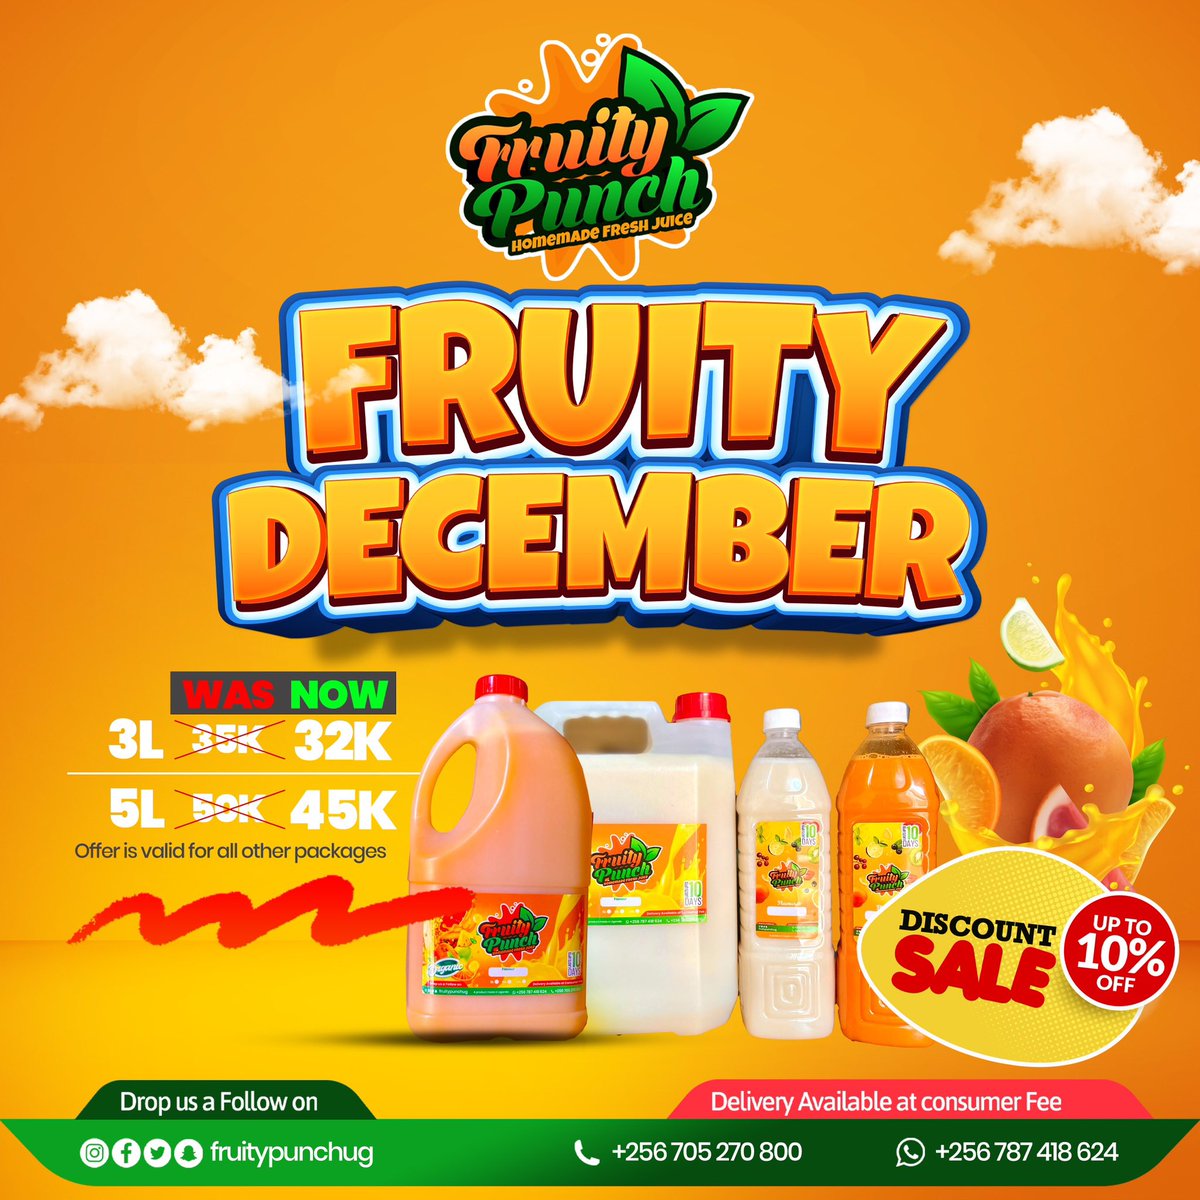 Enjoy blissful moments with Family and Friends this Holiday through our 10% OFF Fruity December Offer. Enjoy all your favorite fruit flavor juices at a ⚠️DISCOUNTED PRICE⚠️. Mix your Feelings 🥭🍓🍇🍉🍏🍋🍌
#fruitypunchug 
#december 
#discountedprices